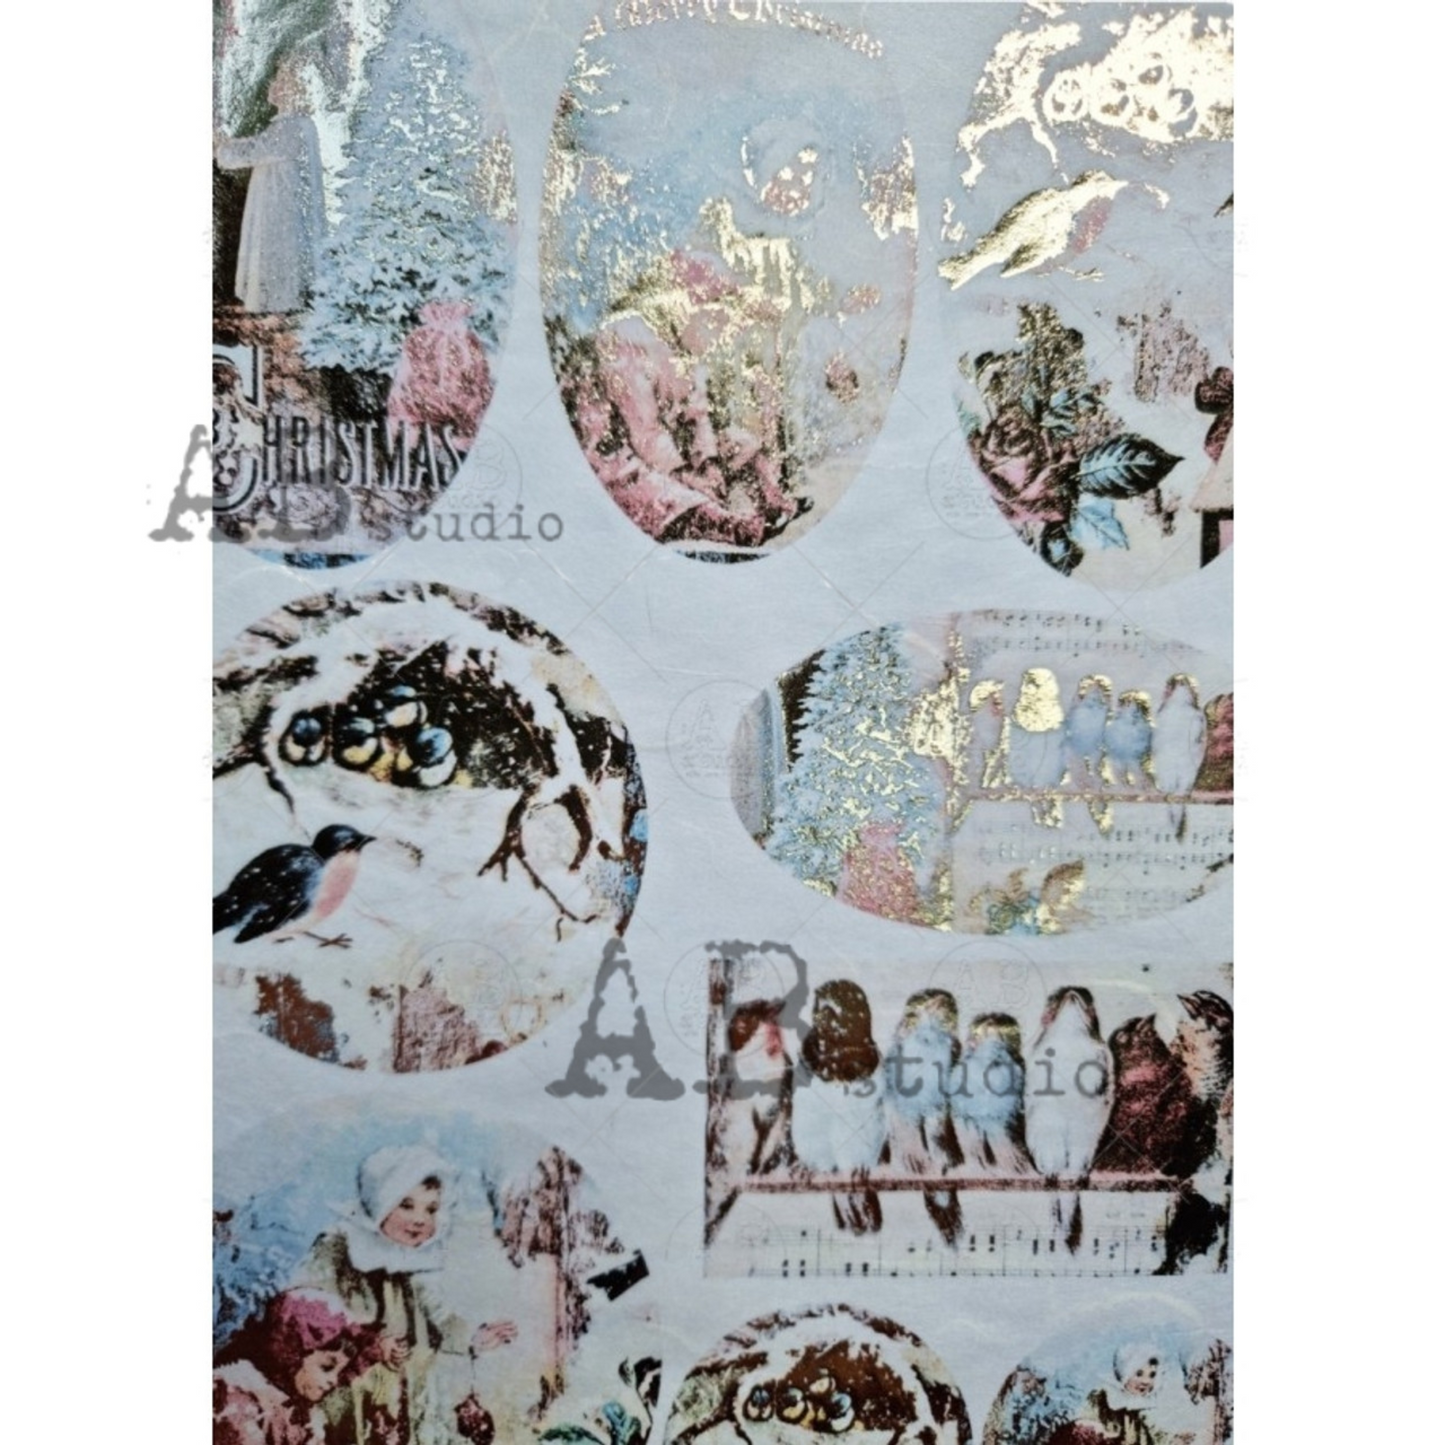 "Gilded Vintage BIrds and Children Scenes" decoupage rice paper by AB Studio available in Size A4 at Milton's Daughter.